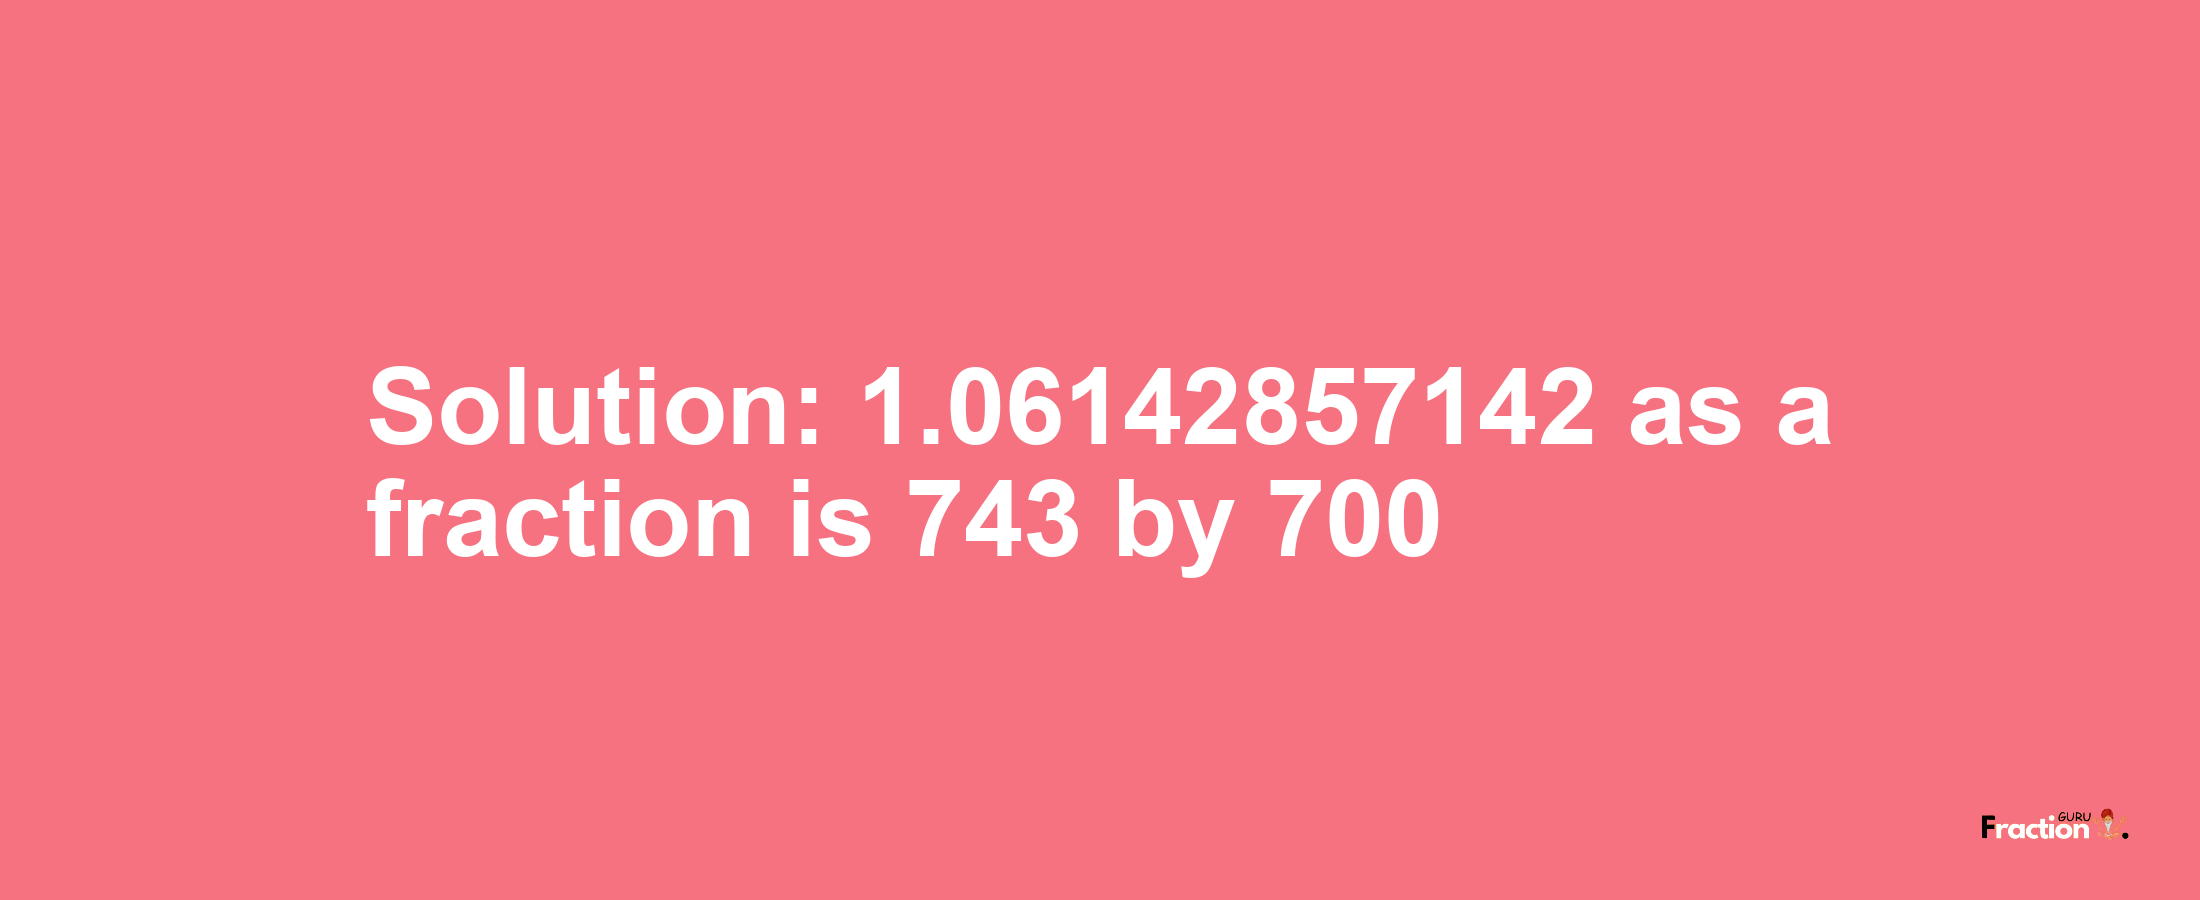 Solution:1.06142857142 as a fraction is 743/700